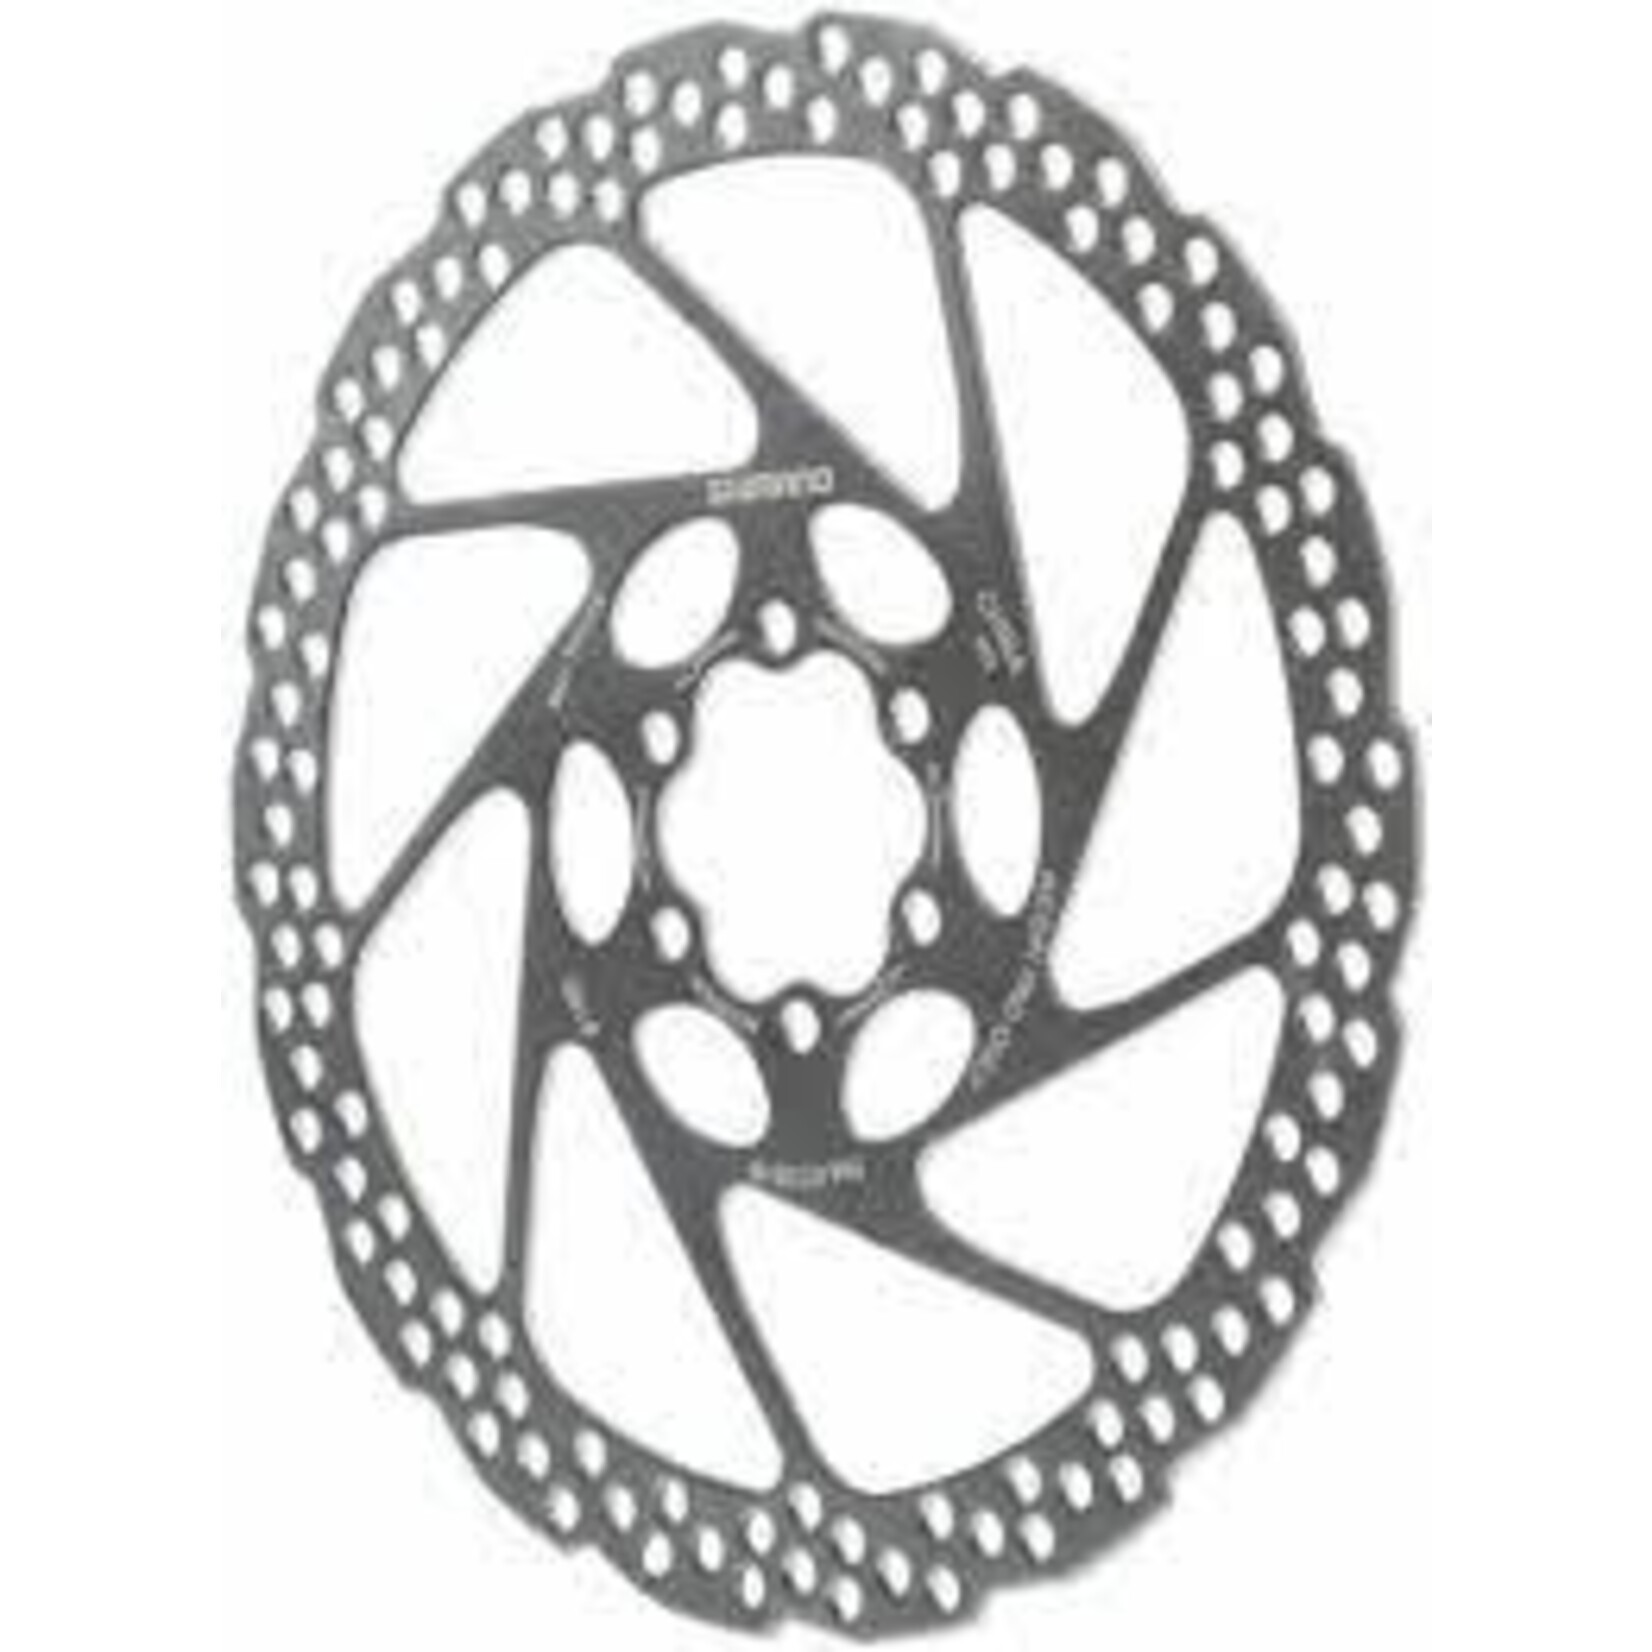 Shimano DISC BRAKE ROTOR SM-RT56, M 180MM, 6-BOLT TYPE, FOR RESIN PAD ONLY